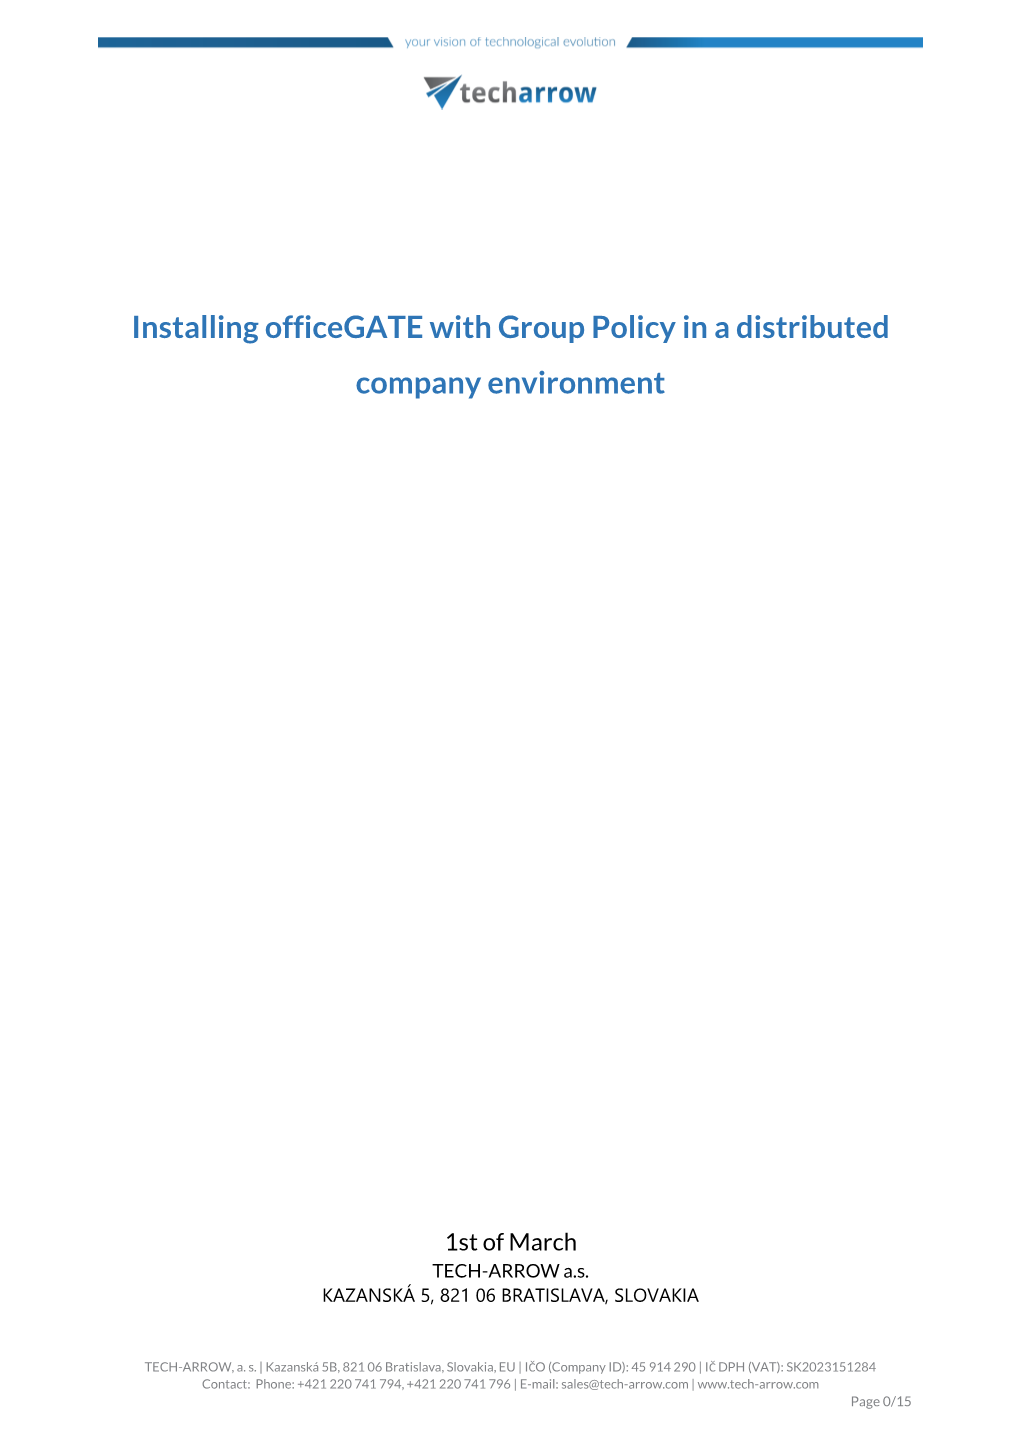 Installing Officegate with Group Policy in a Distributed Company Environment